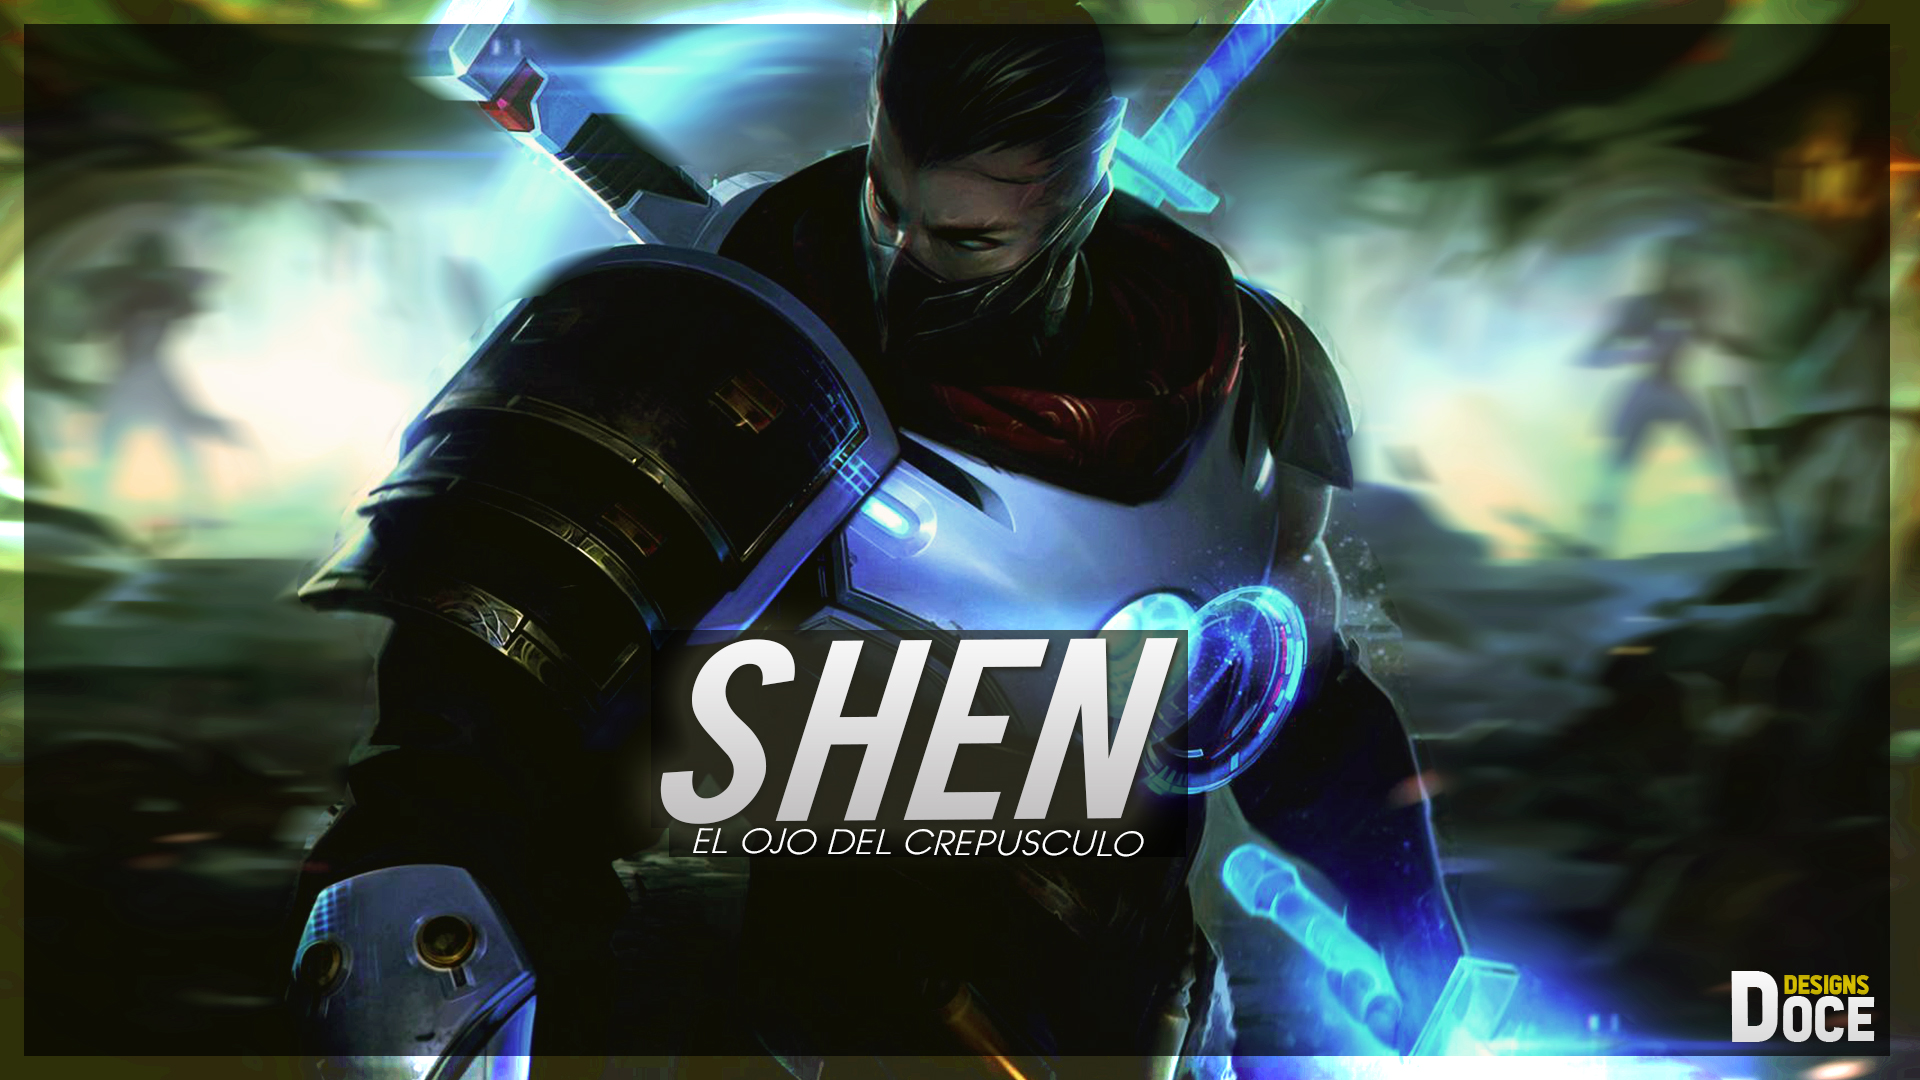 General 1920x1080 League of Legends Shen (League of Legends) PC gaming warrior armor video games